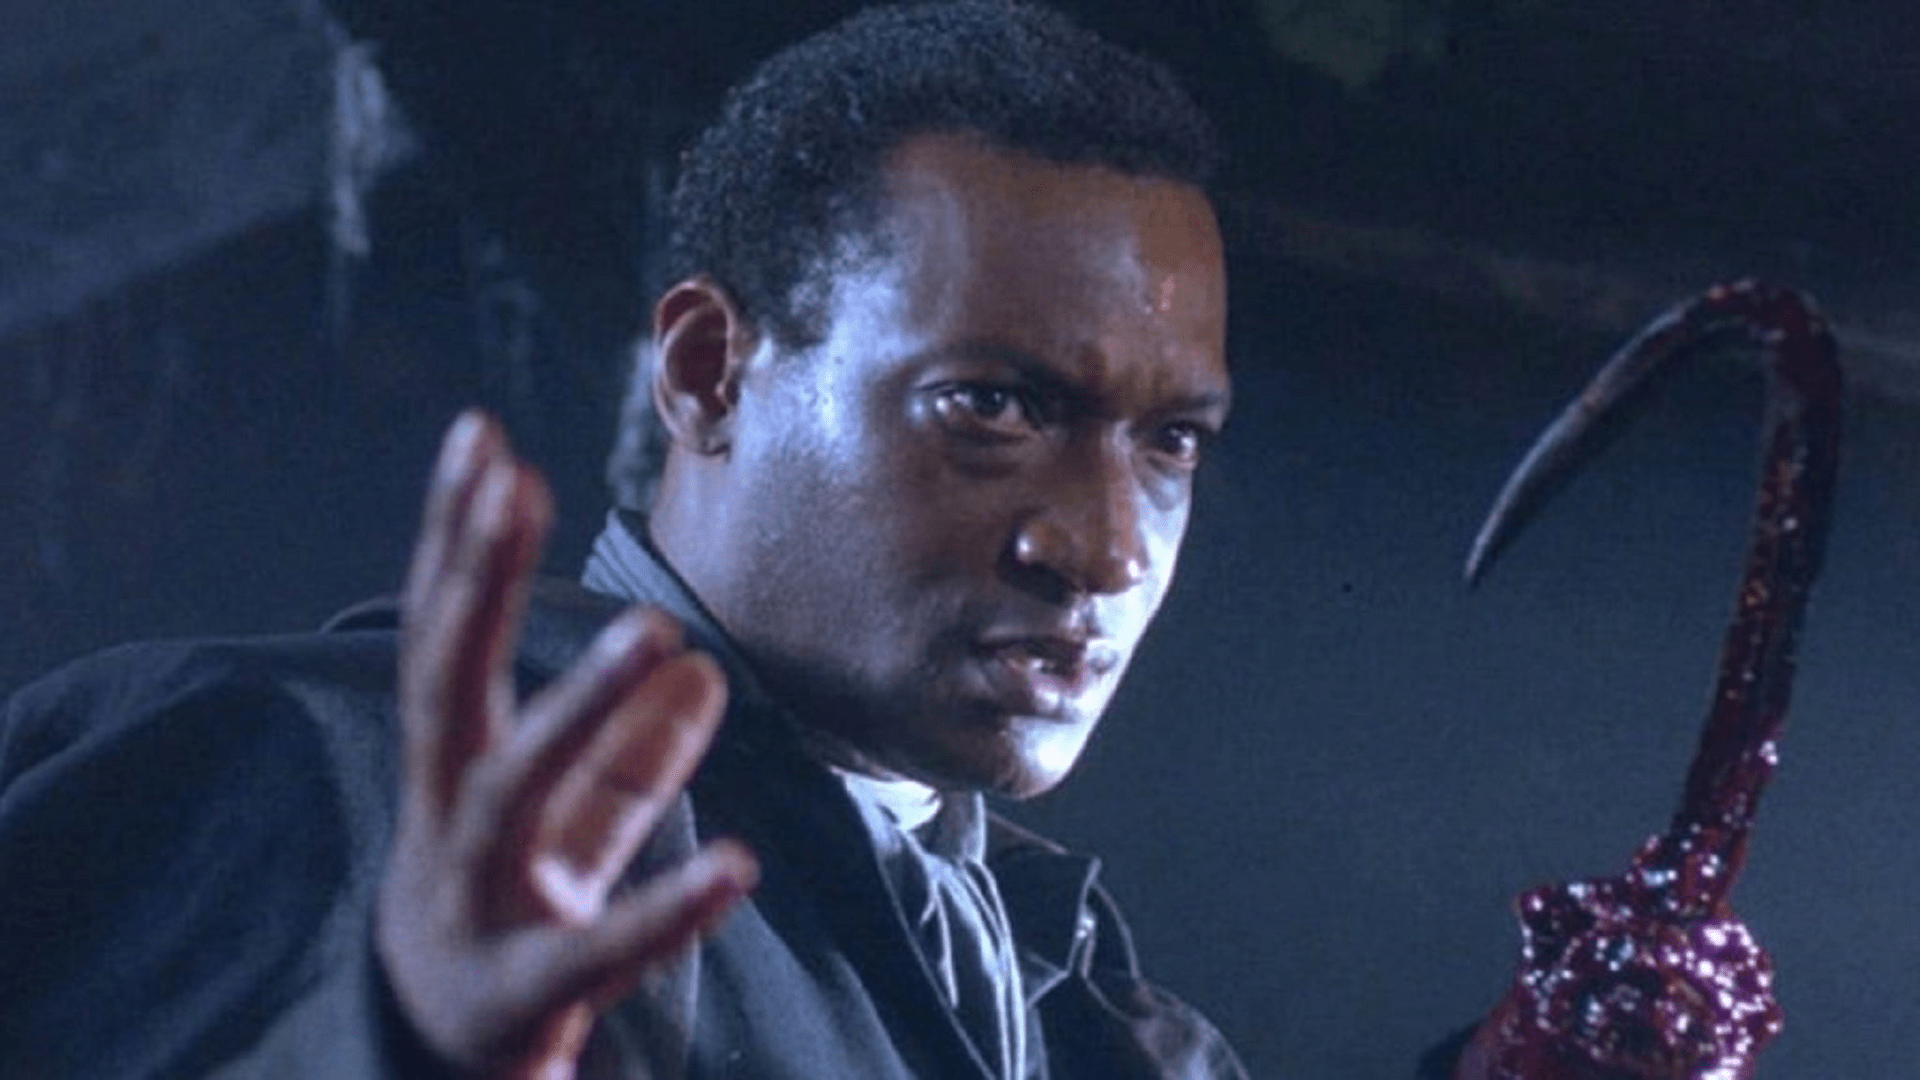 DaCosta on Tony Todd's Candyman role, “He's the lightning rod”